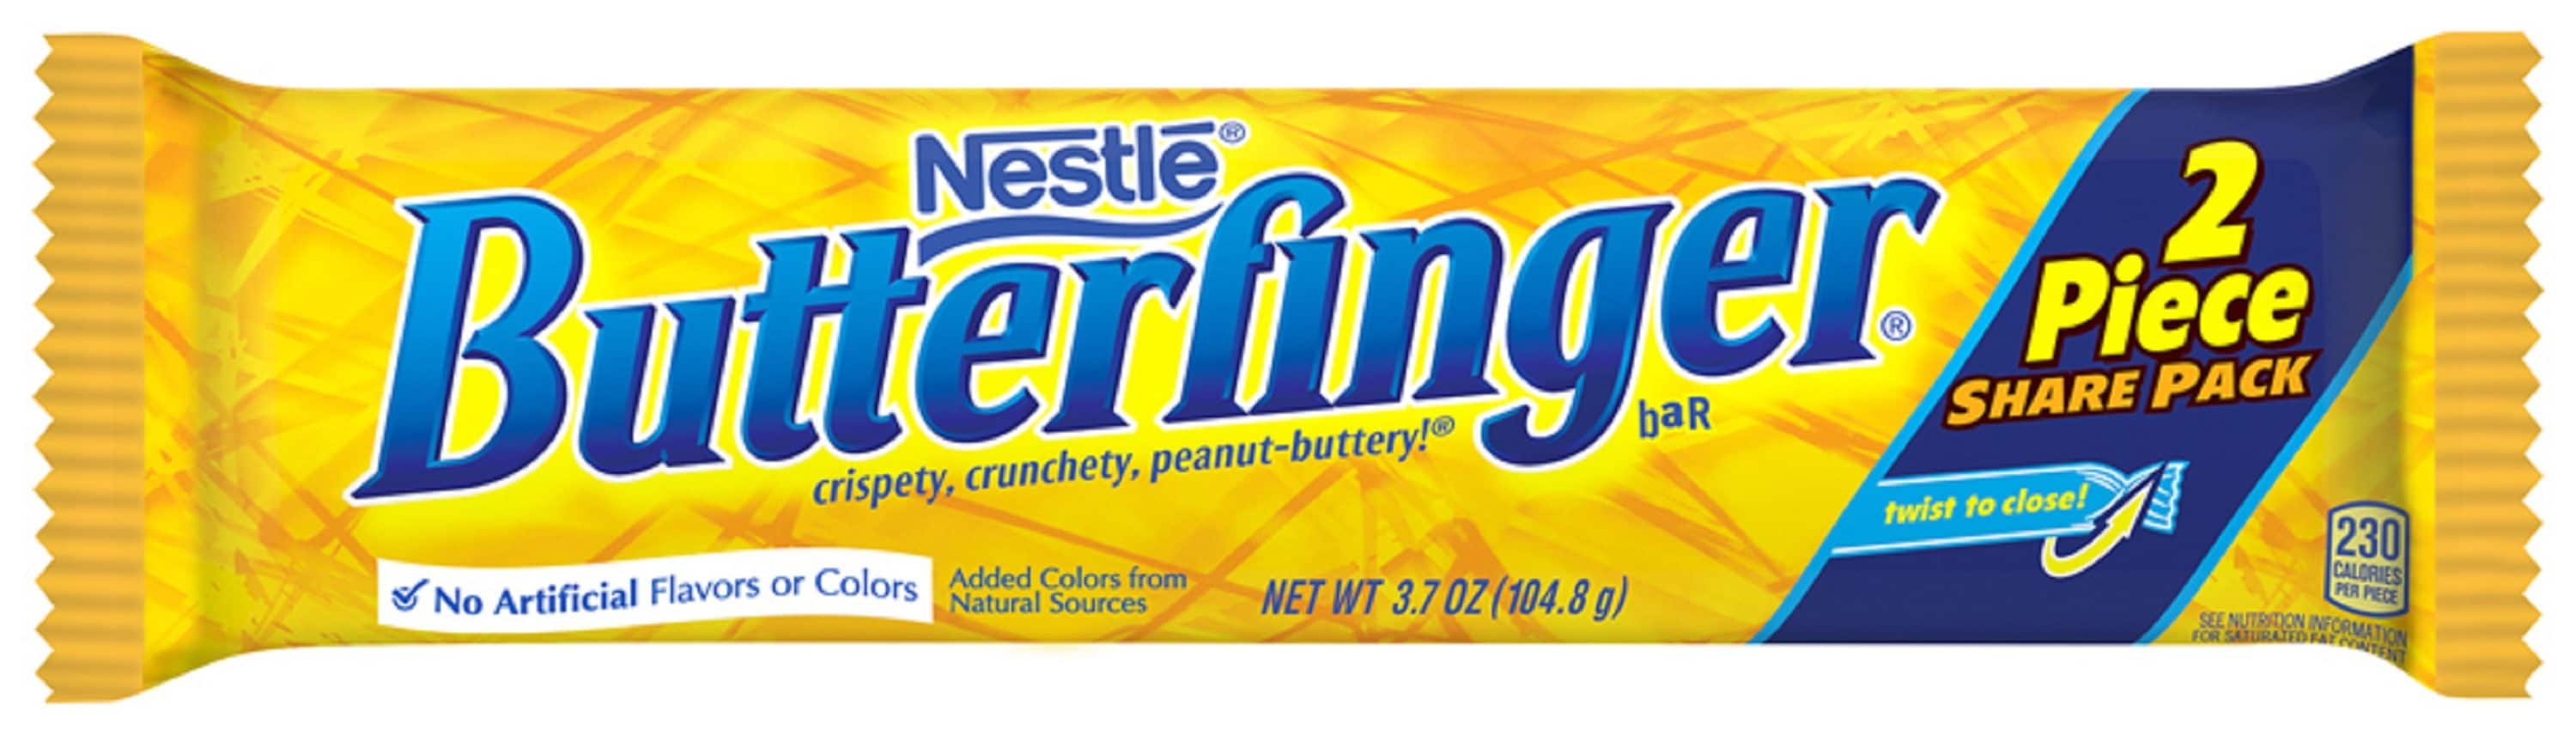 Butterfinger ready to stick it to Reese's - with a new cup